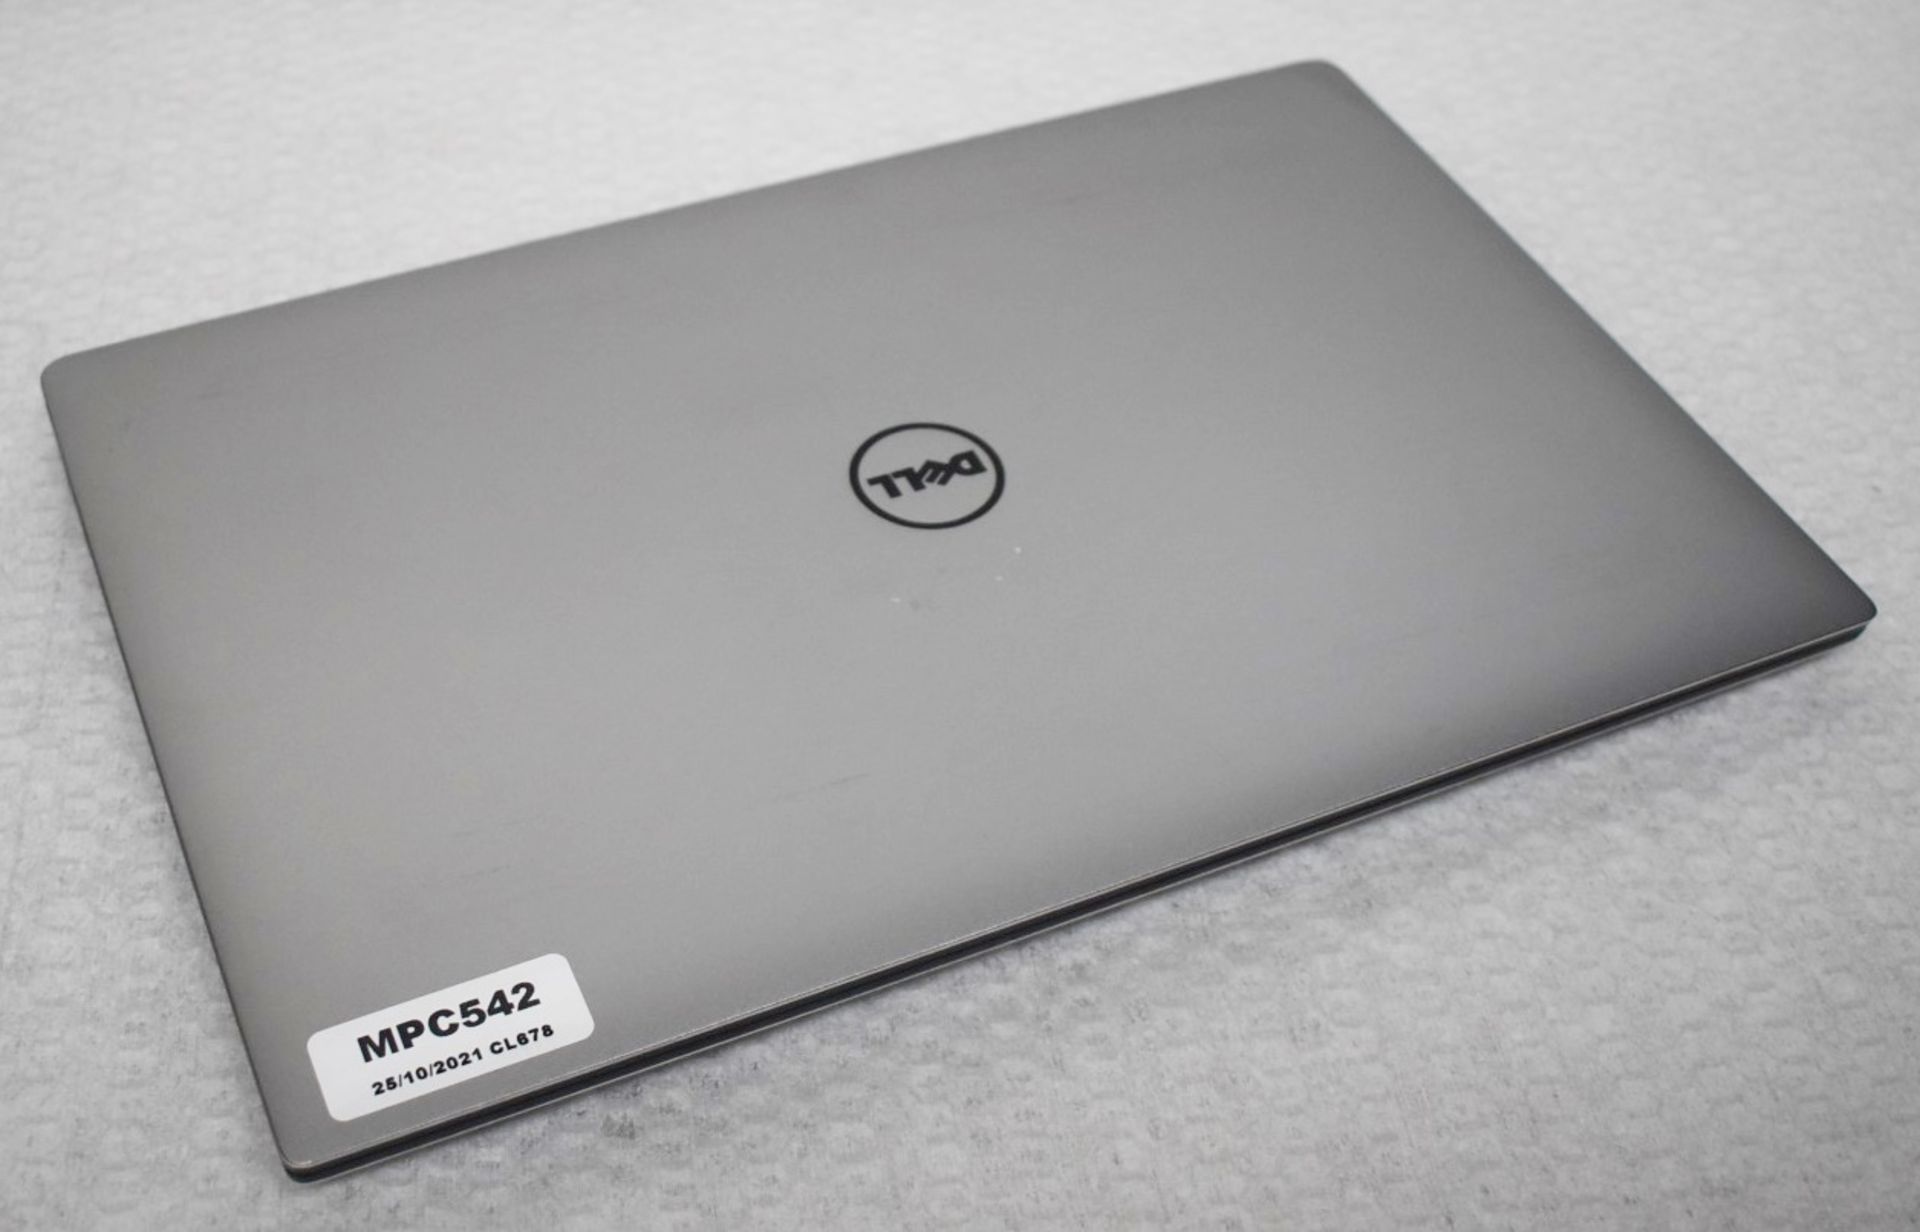 1 x Dell XPS 15 9570 15.6" Full HD Laptop Featuring an Intel i7-7700hq 3.8ghz Quad Core Processor, - Image 15 of 17